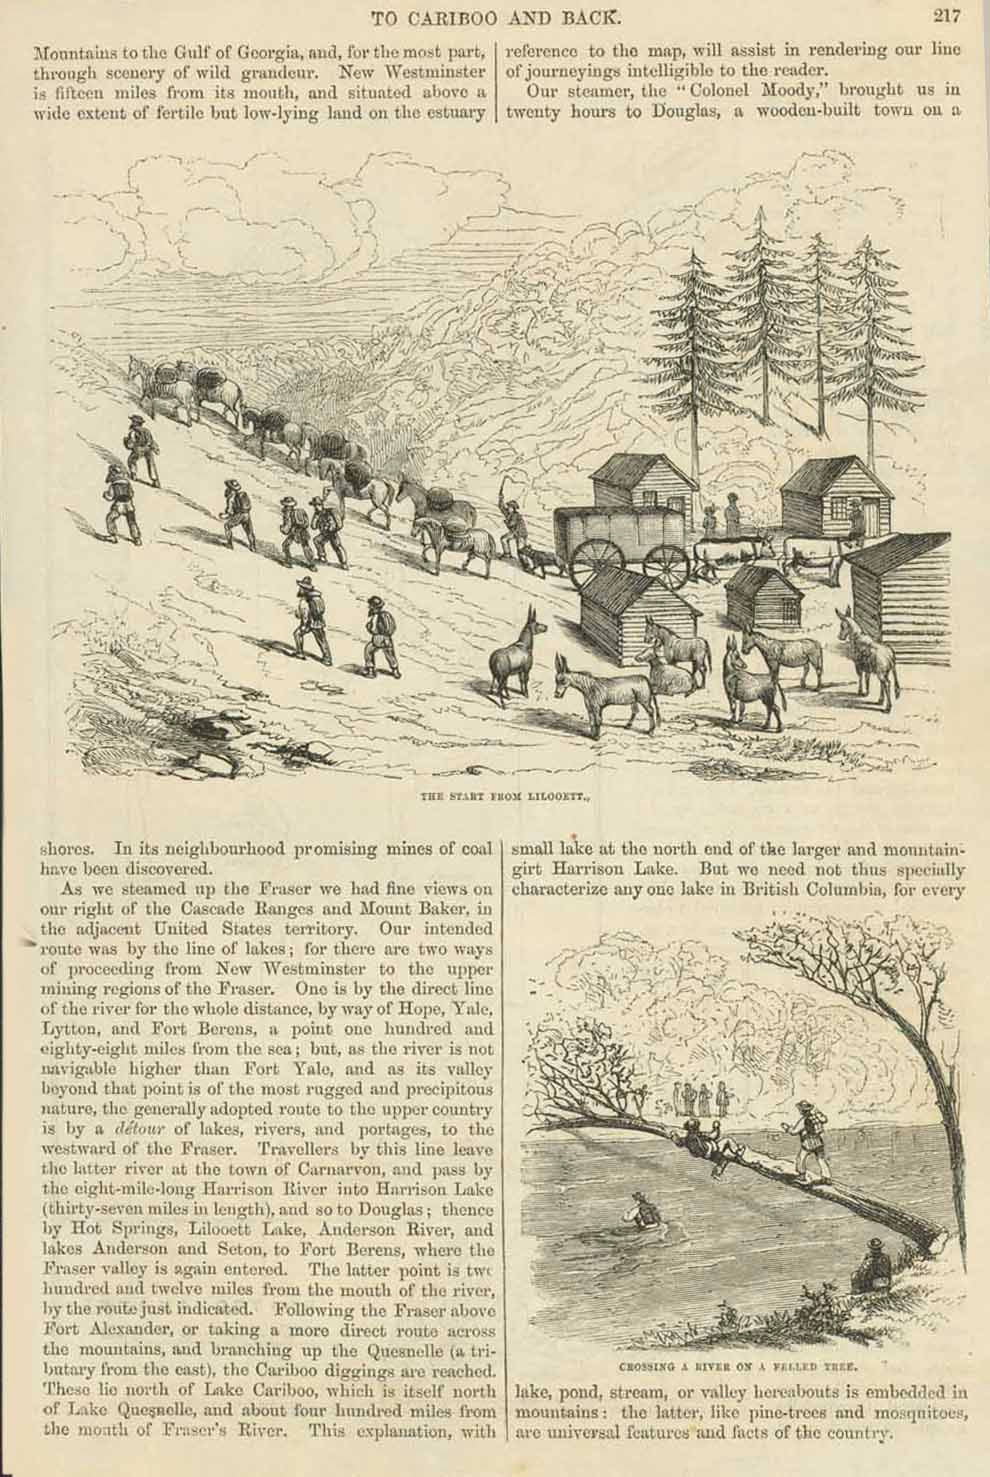 Upper image: "The Start from Liloett" Lower image; "Crossing a River on a Felled Tree"  Wood engravings and text on both sides of a page published ca 1880.  Original antique print  